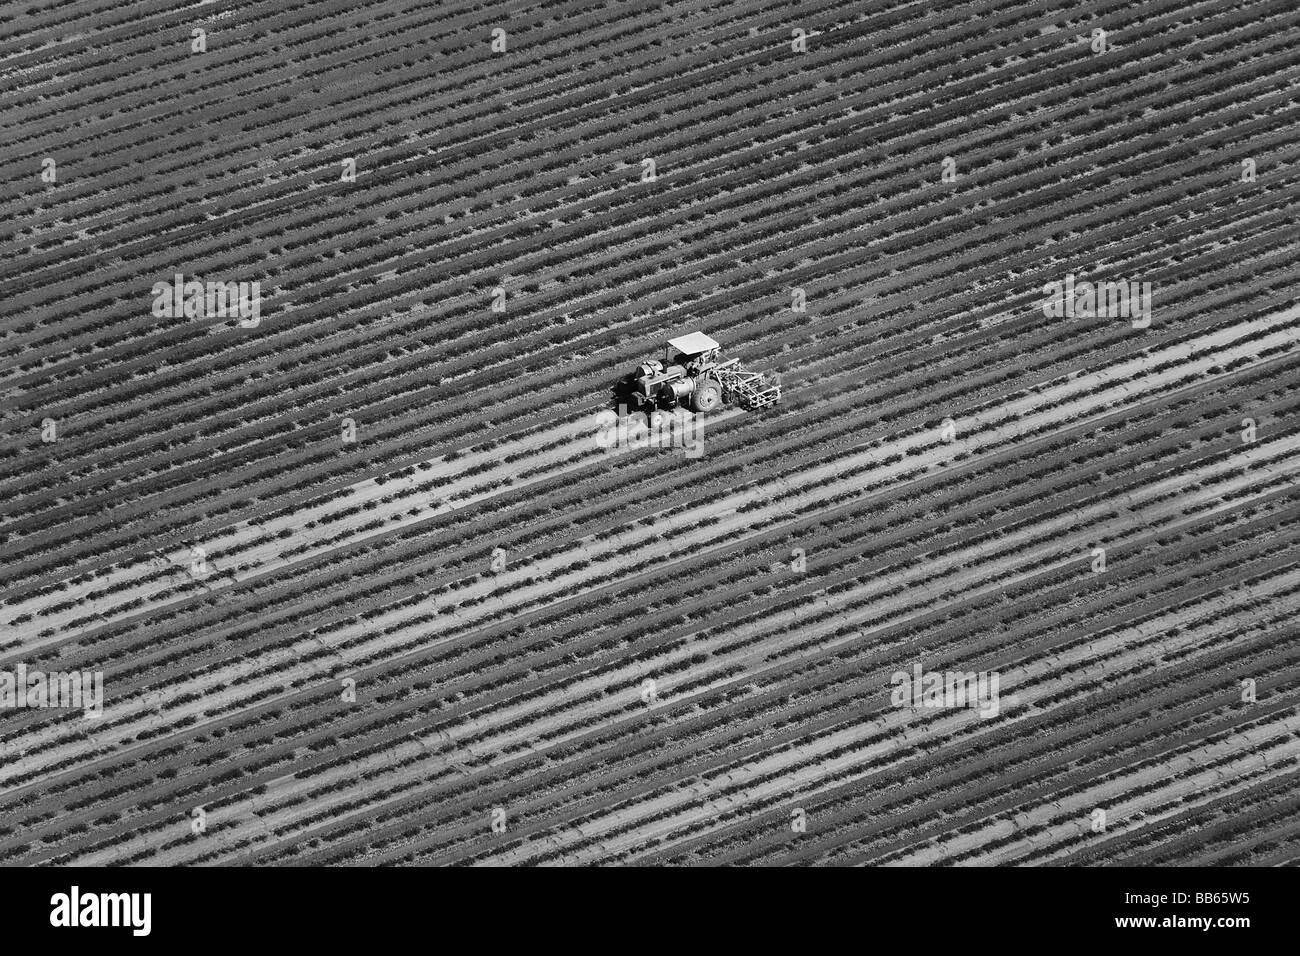 aerial view above tractor maintaining planted agricultural field California central valley Stock Photo